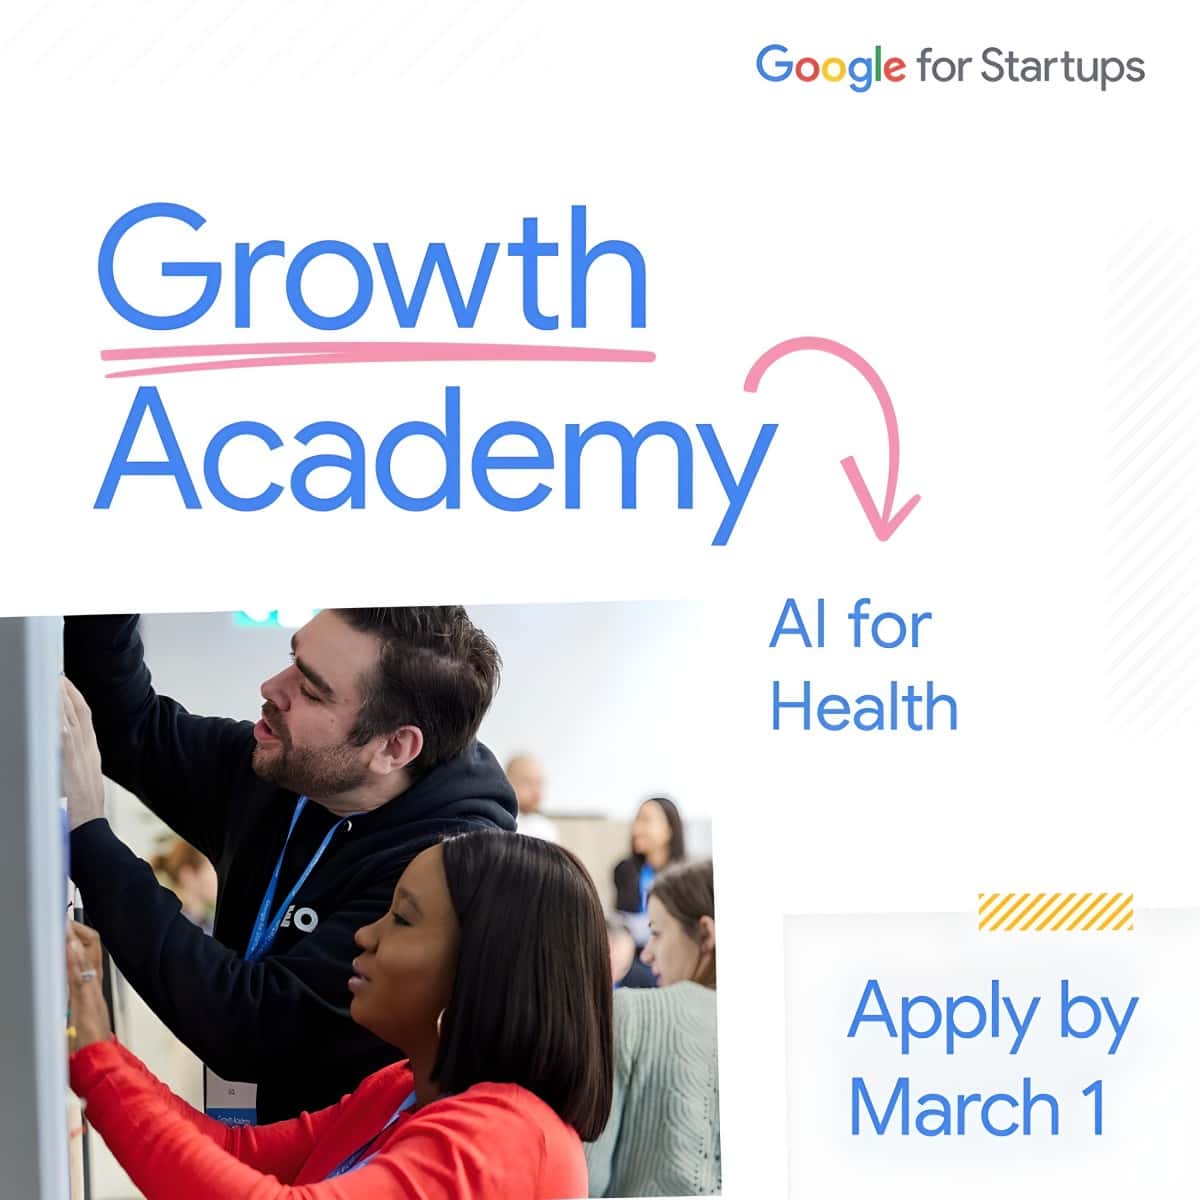  Google for Startups Growth Academy 